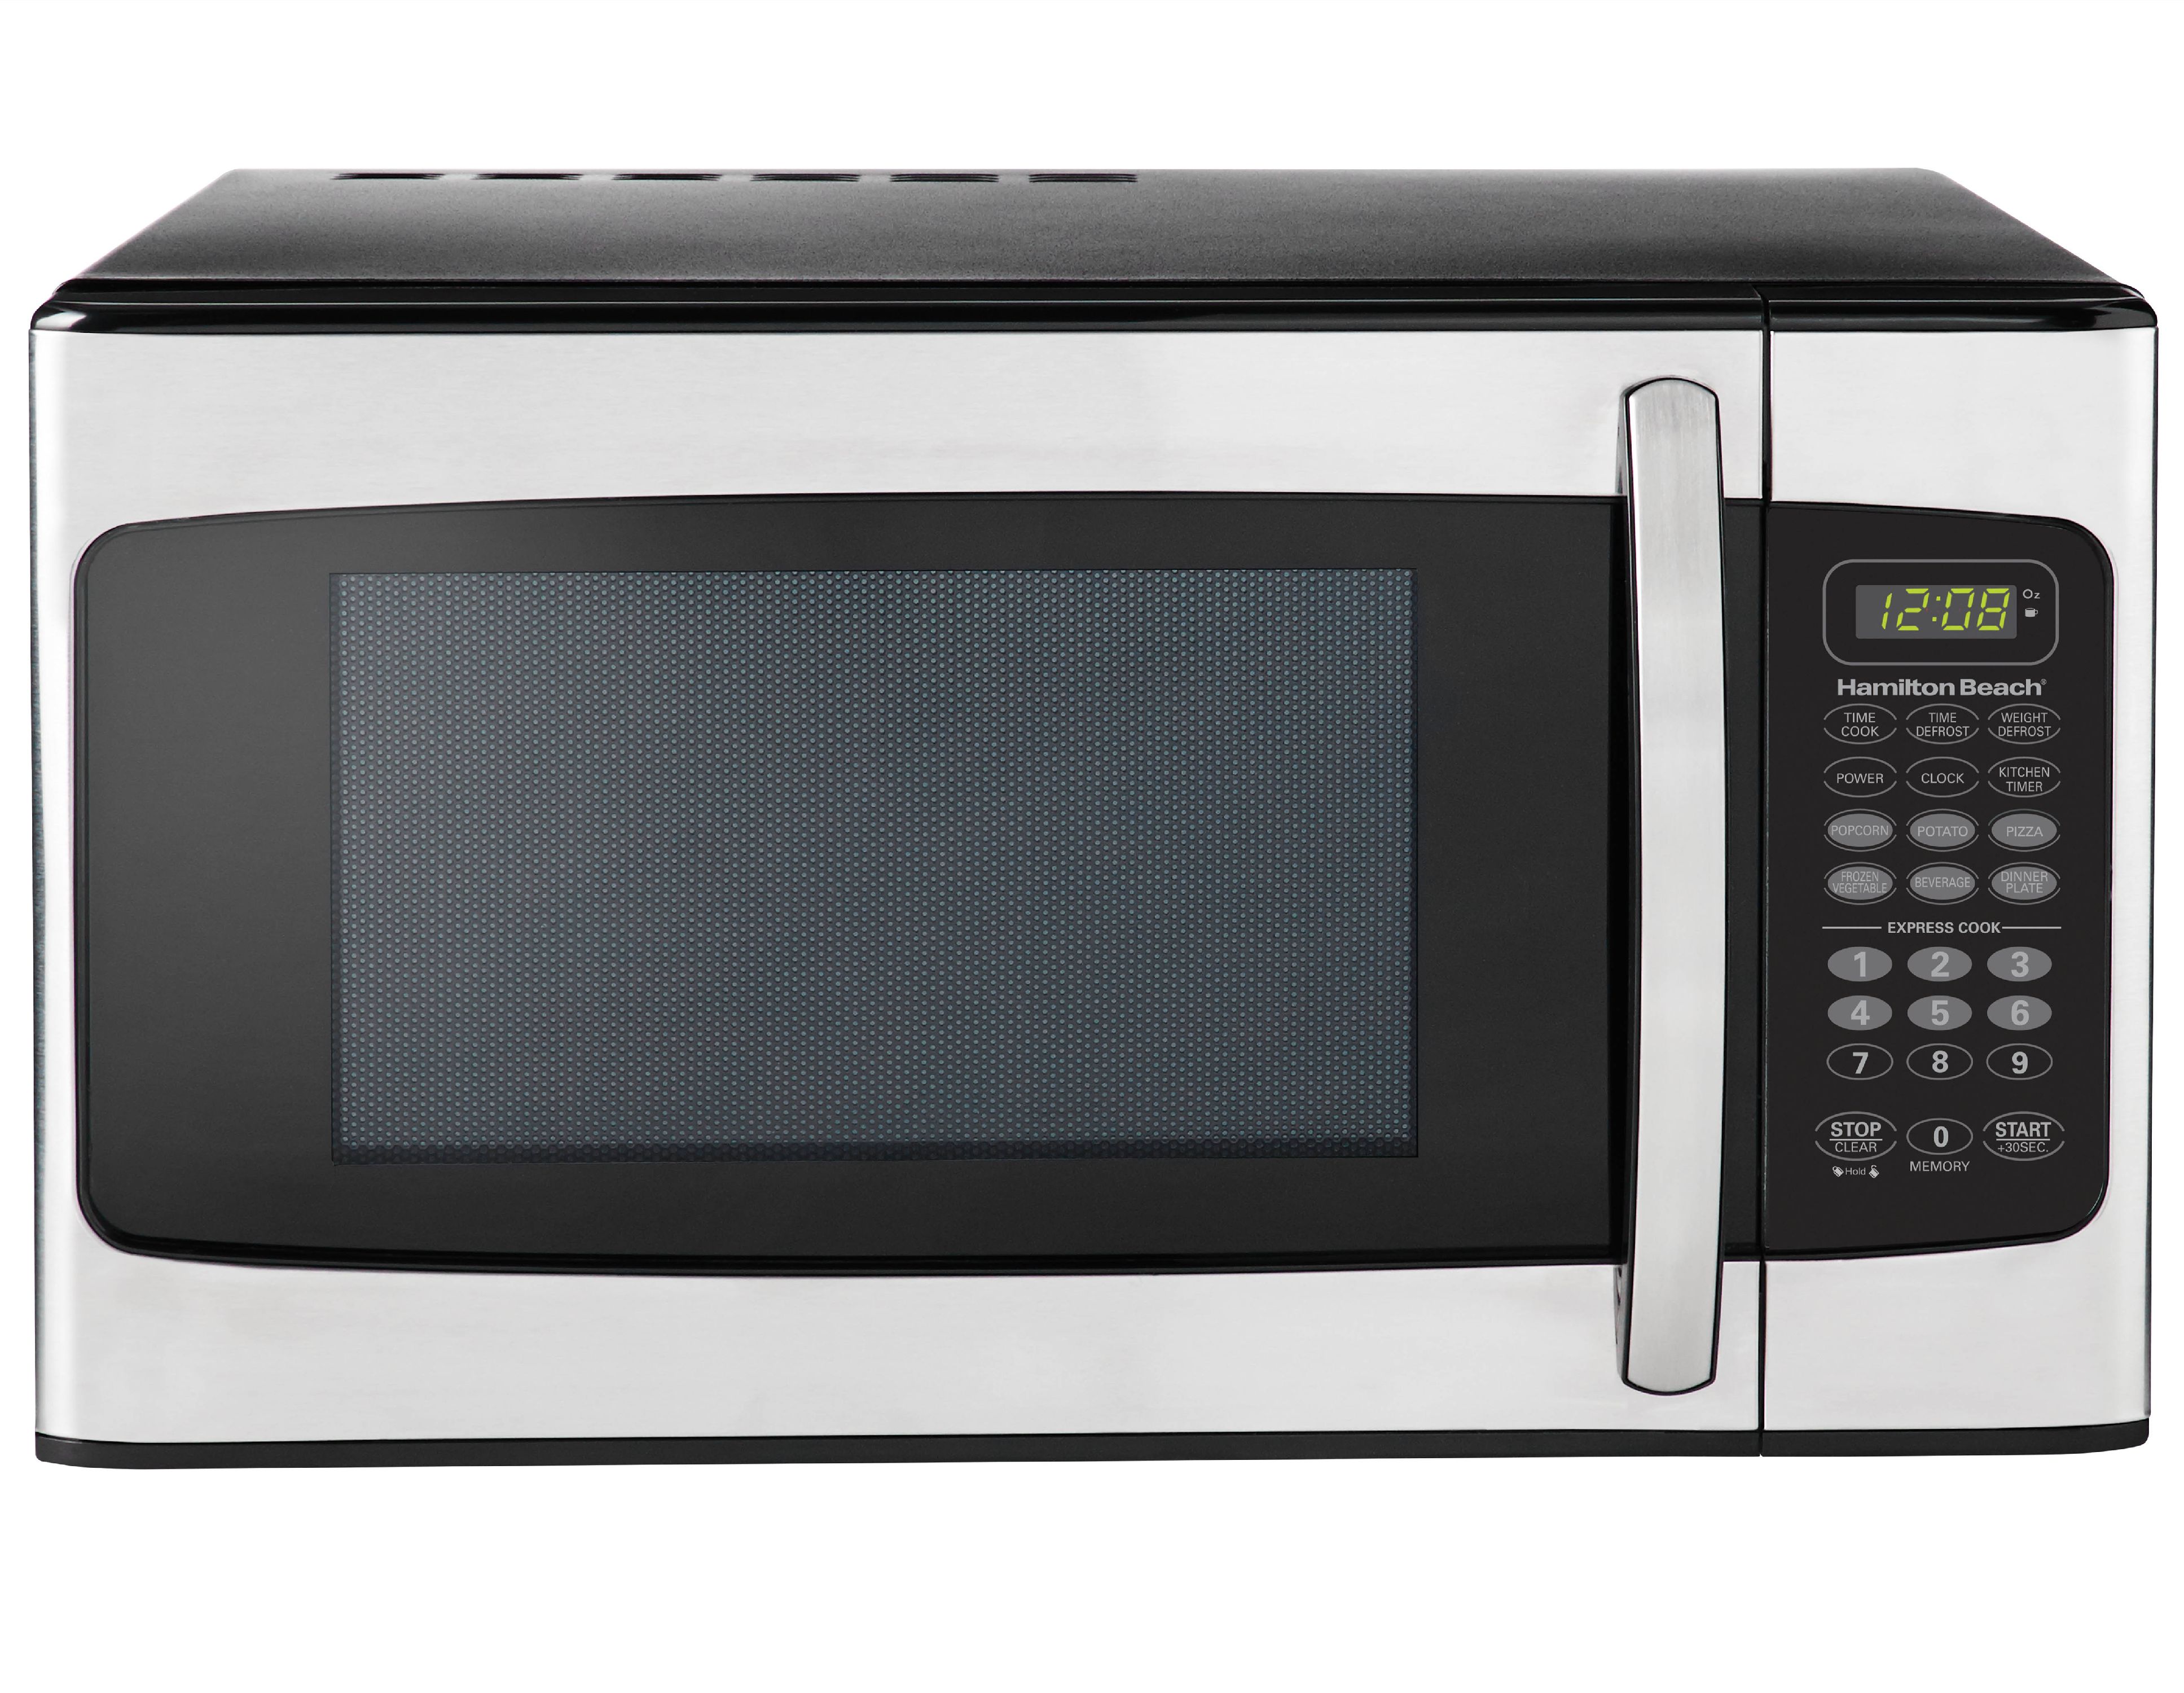 Hamilton Beach 1.1 Cu. ft. Stainless Steel Mid Size, 1000 W, Microwave Oven - image 1 of 5